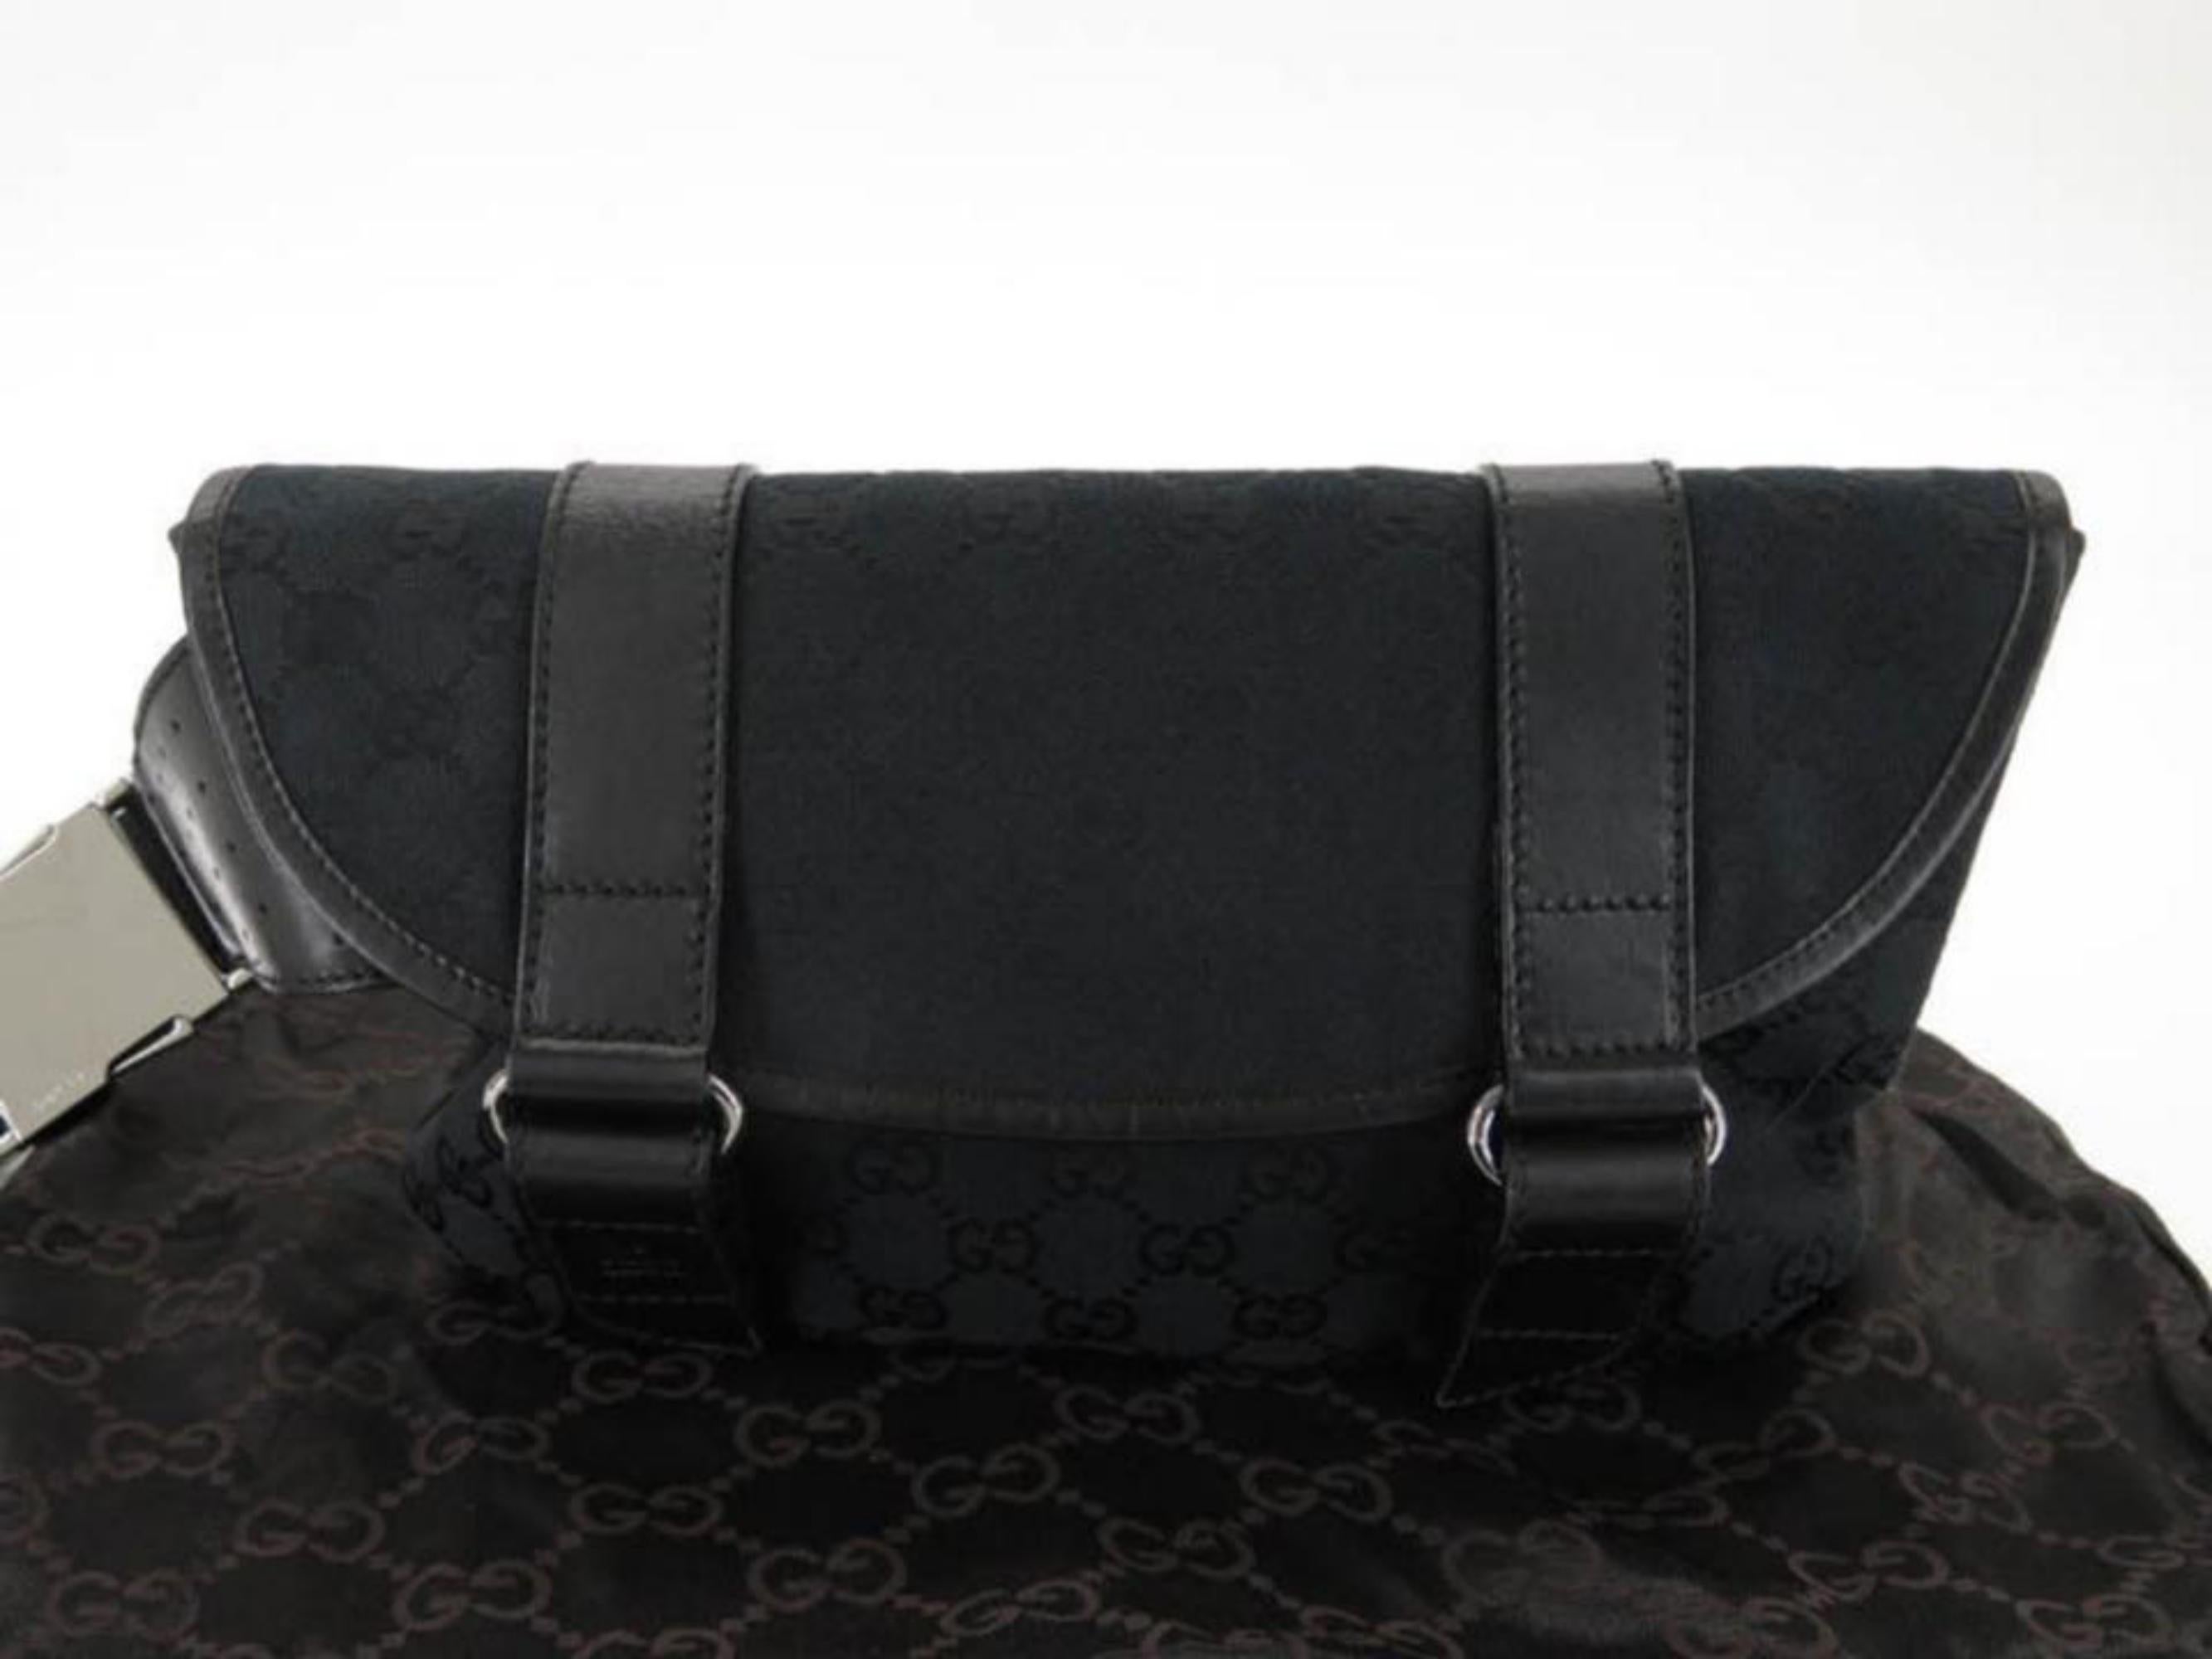 Gucci Gg Belt Pouch Waist Pack 867065 Black Coated Canvas Cross Body Bag For Sale 5